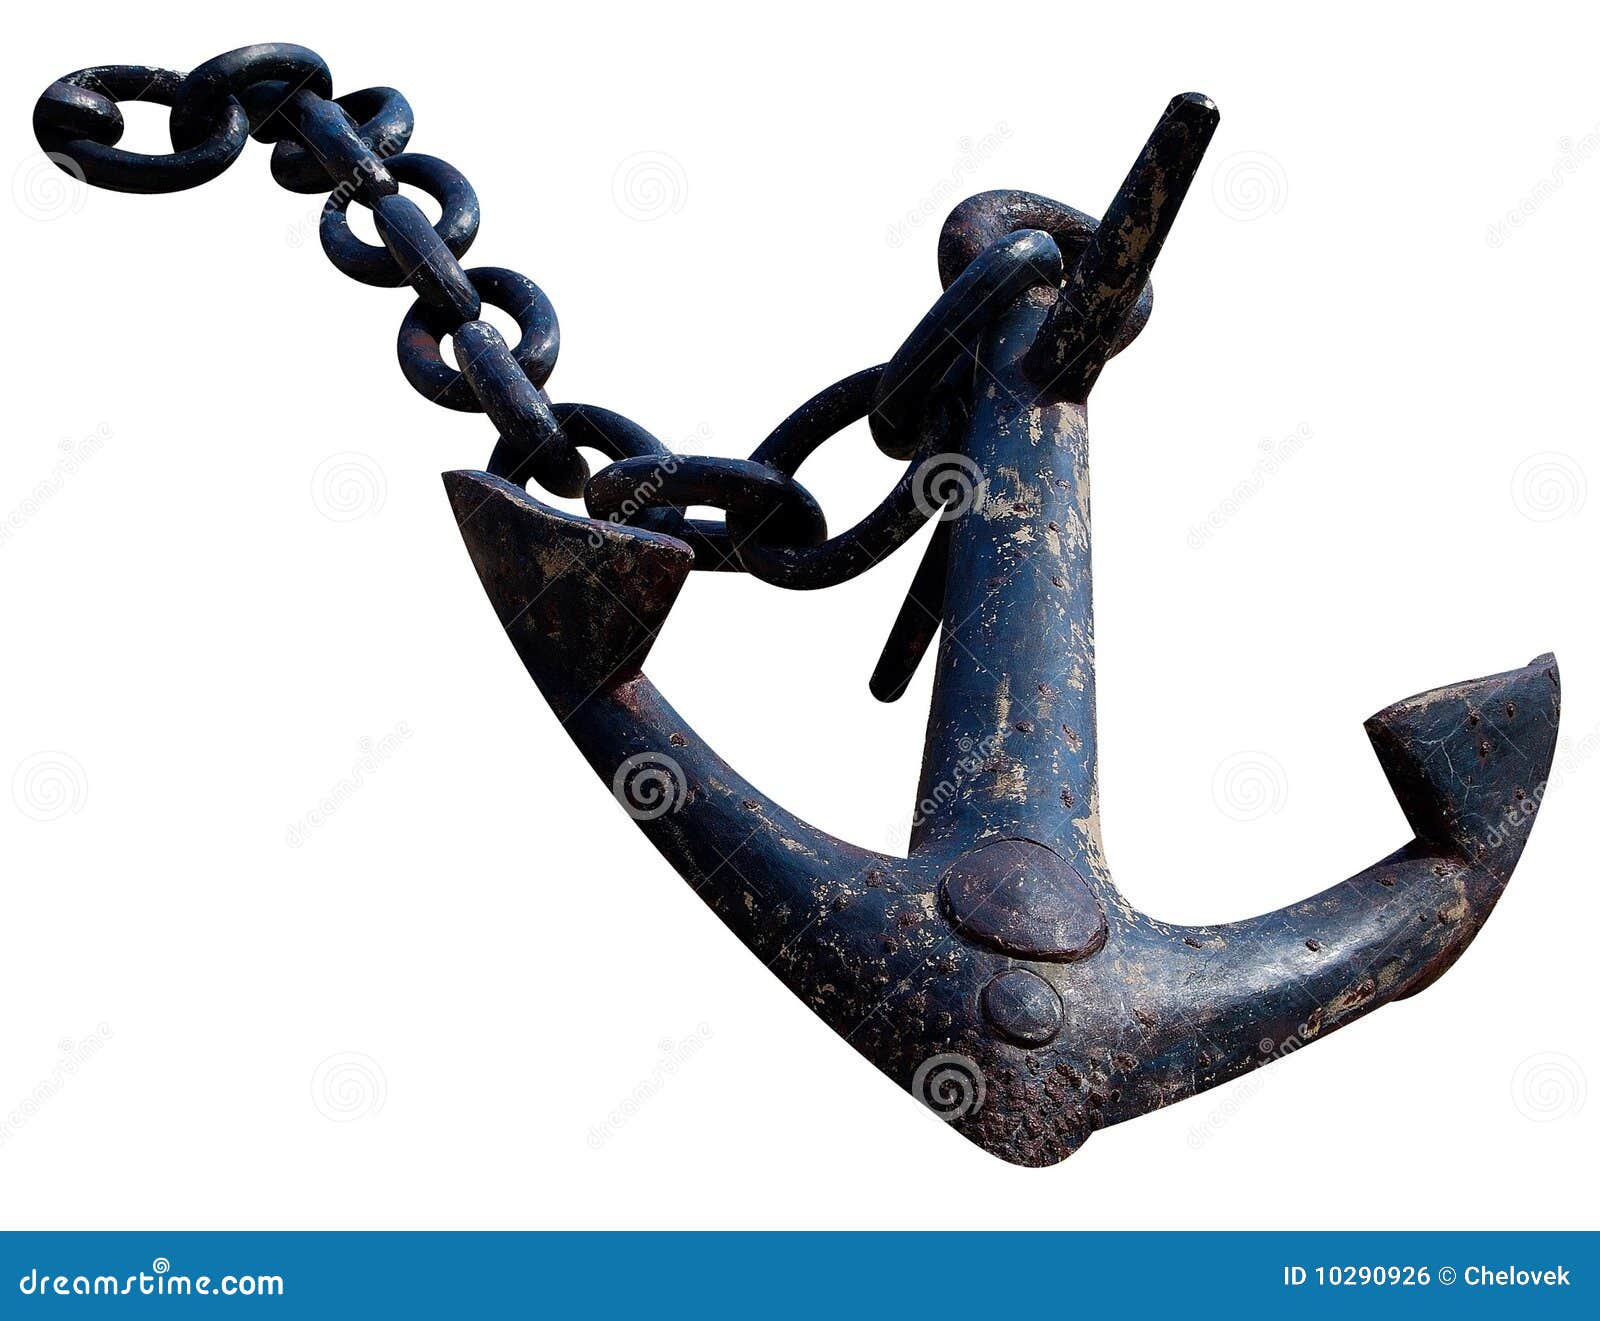 Old Anchor Royalty Free Stock Image - Image: 10290926